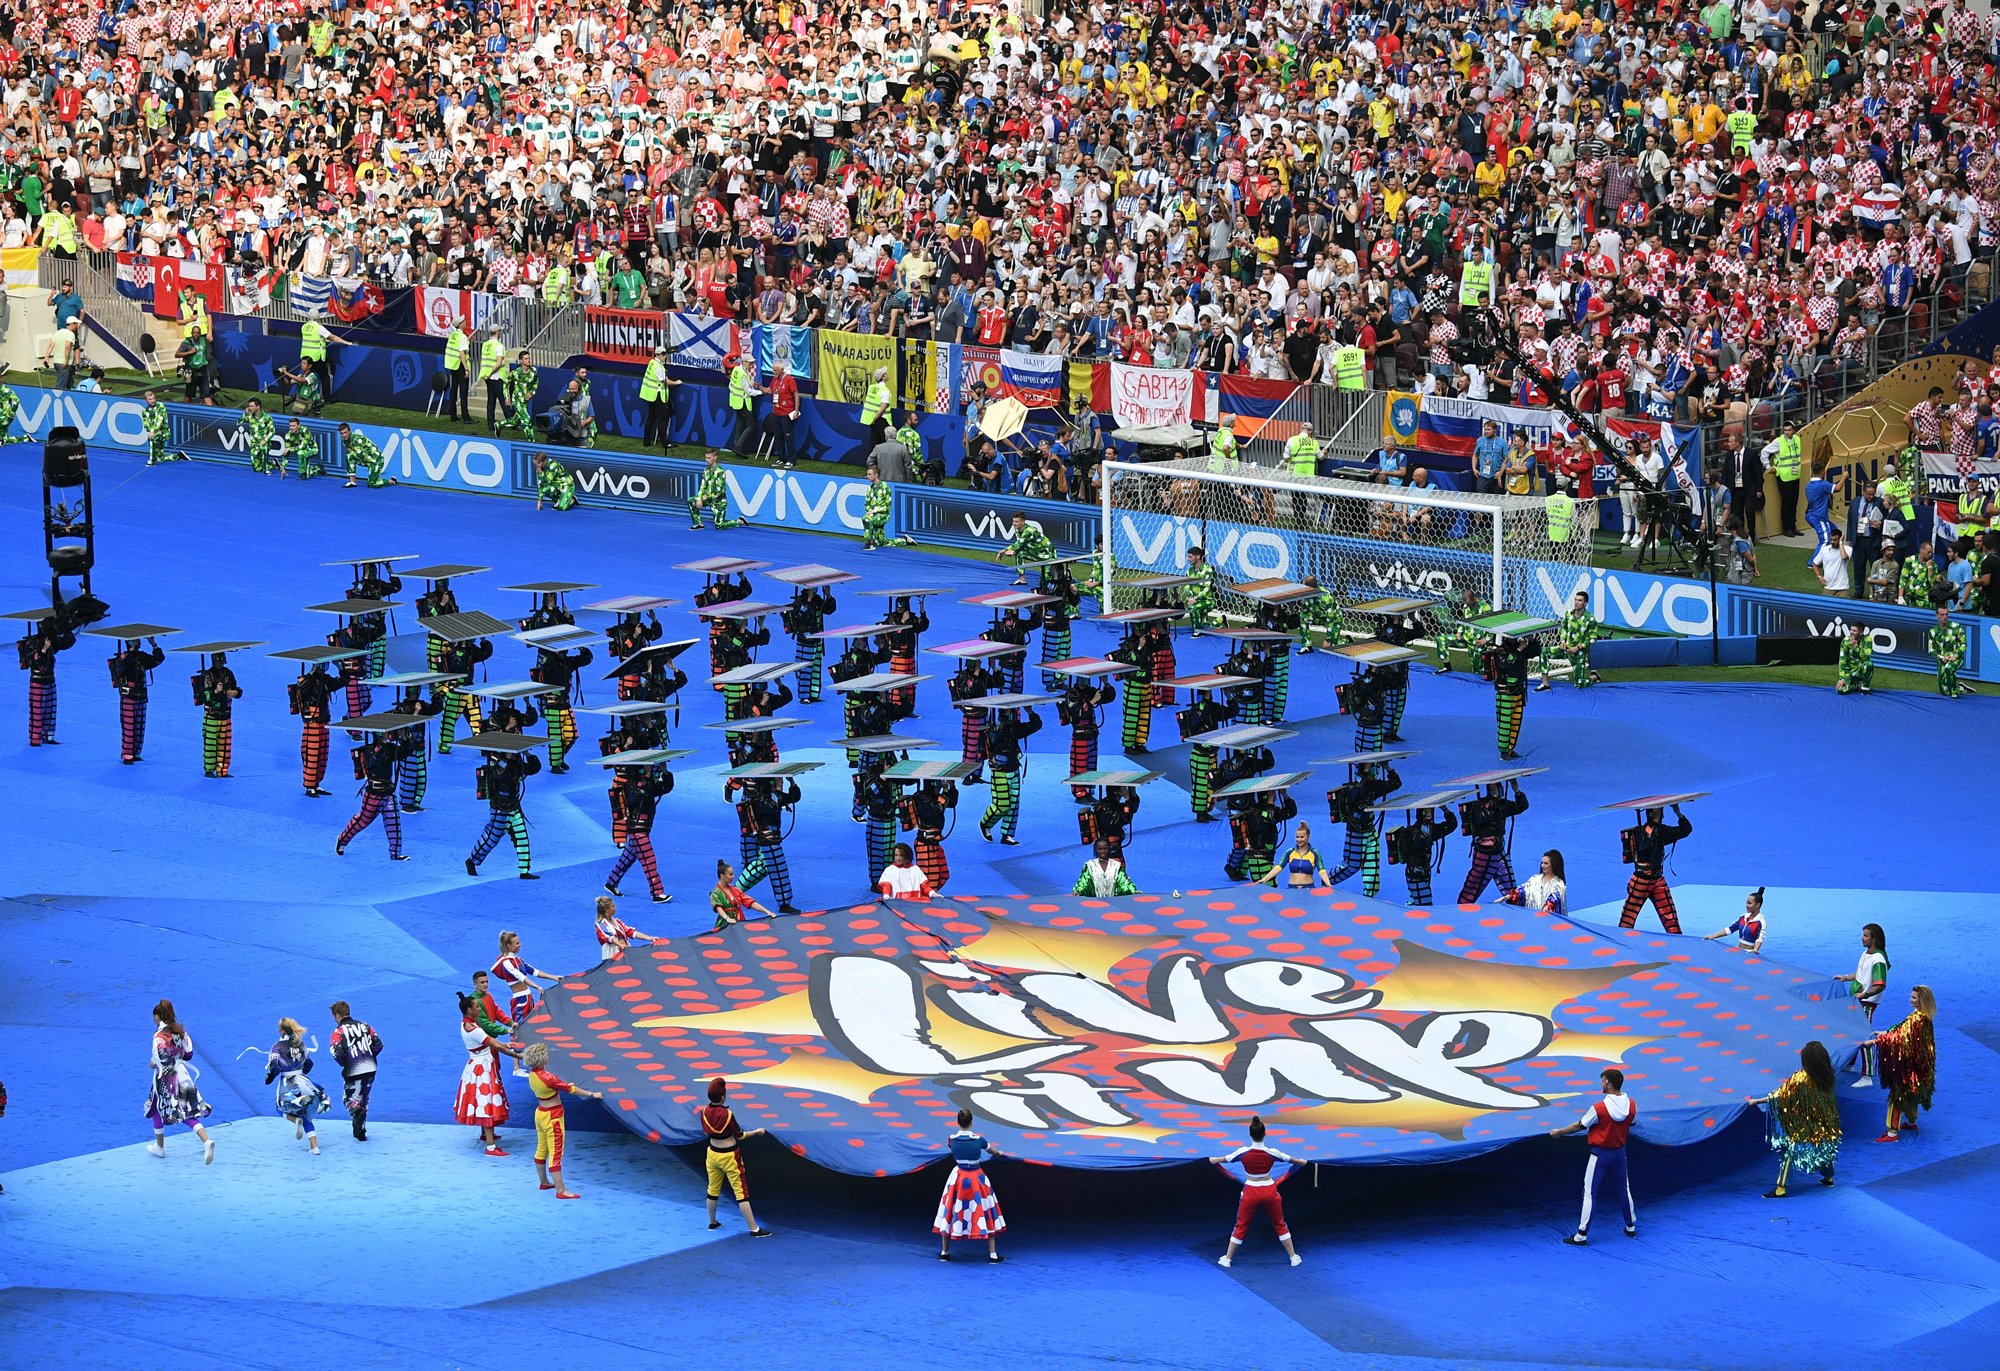 Vivo Coverage Of FIFA World Cup In Russia [PHOTOS]